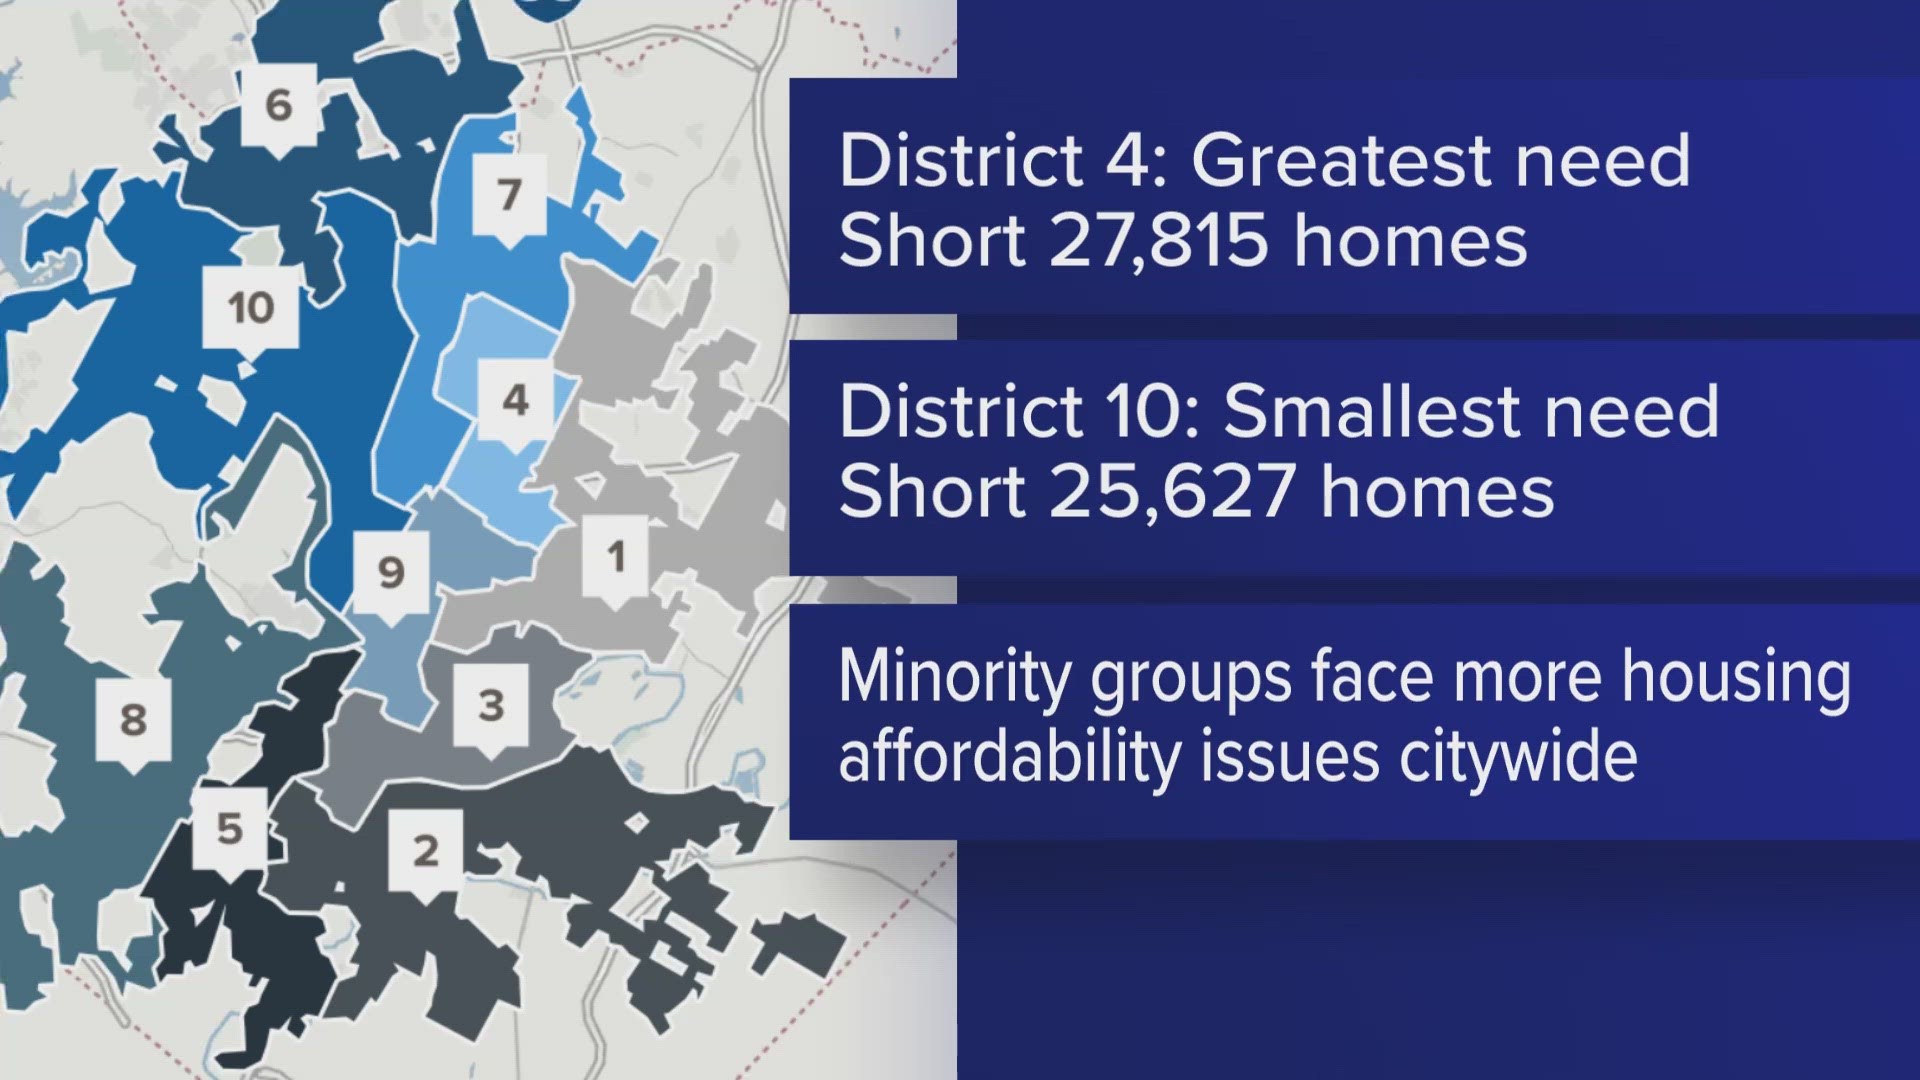 The report compared Austin’s housing deficiencies by City Council districts and racial groups.